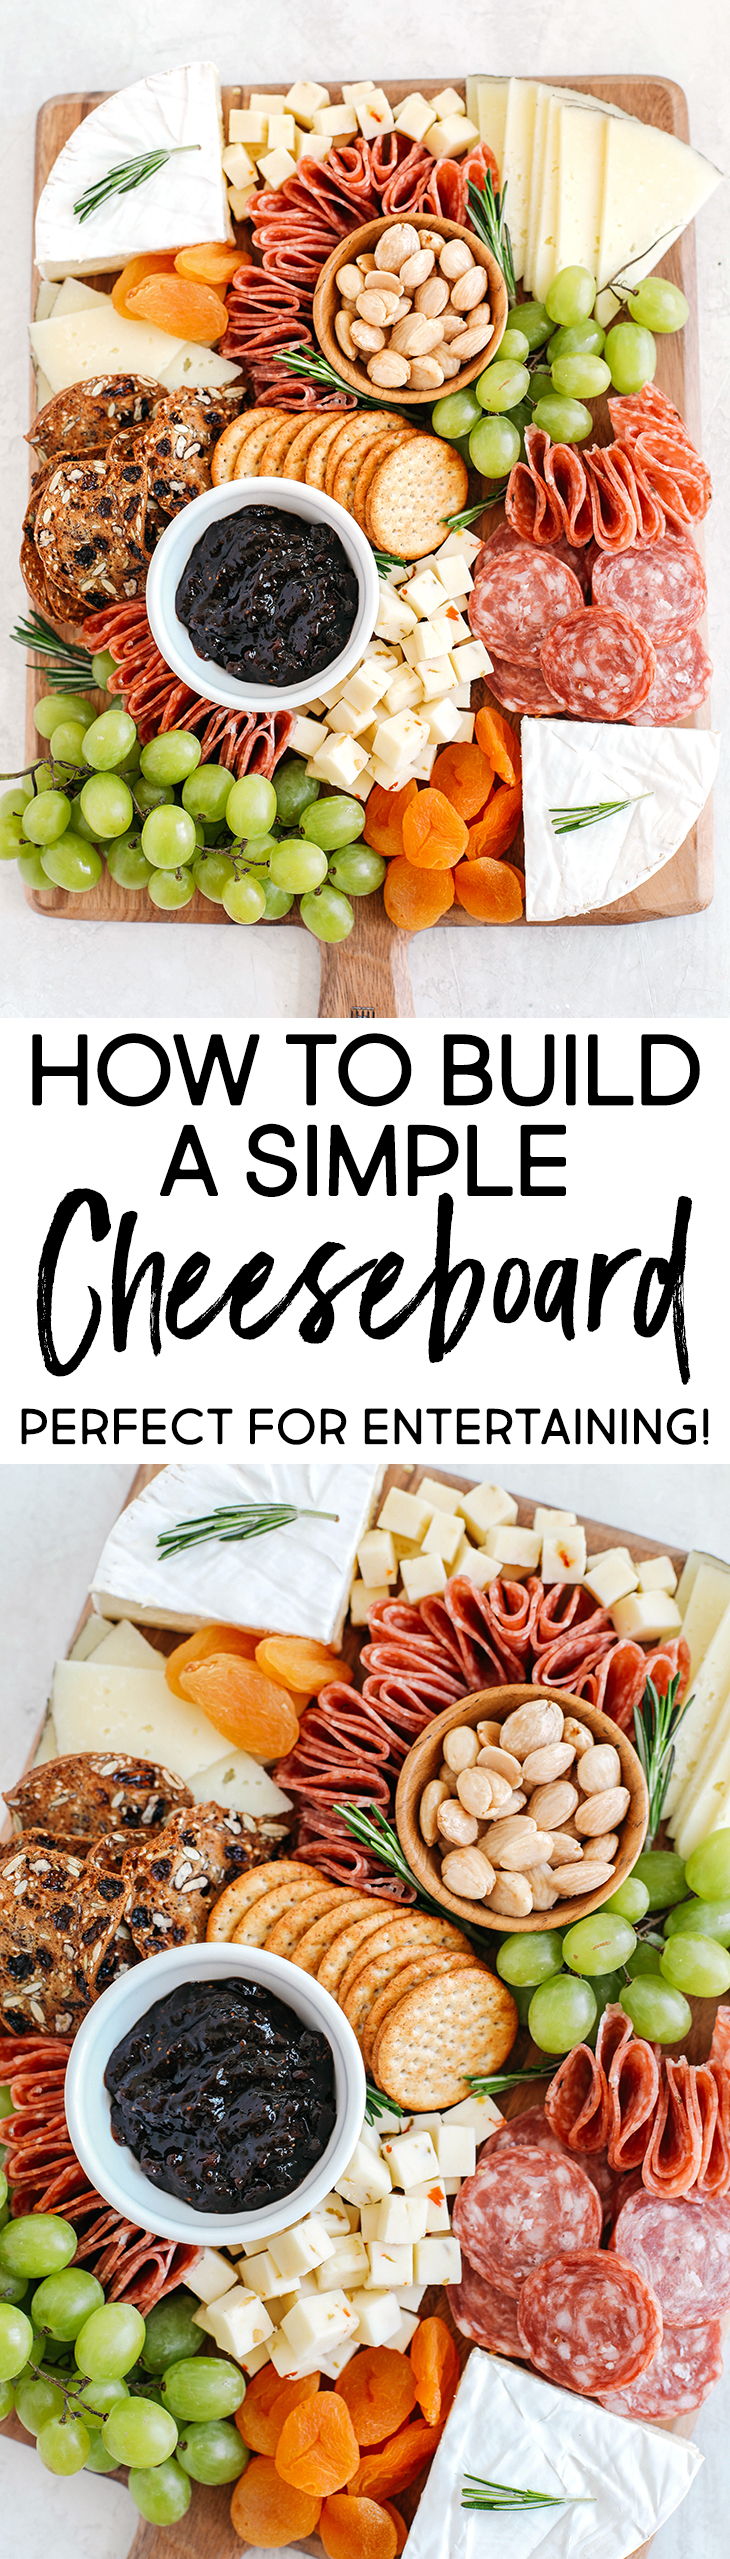 My favorite tips and tricks for building the perfect cheeseboard with all your favorite charcuterie that is simple, beautiful and made in just minutes!  Perfect for everyday entertaining!